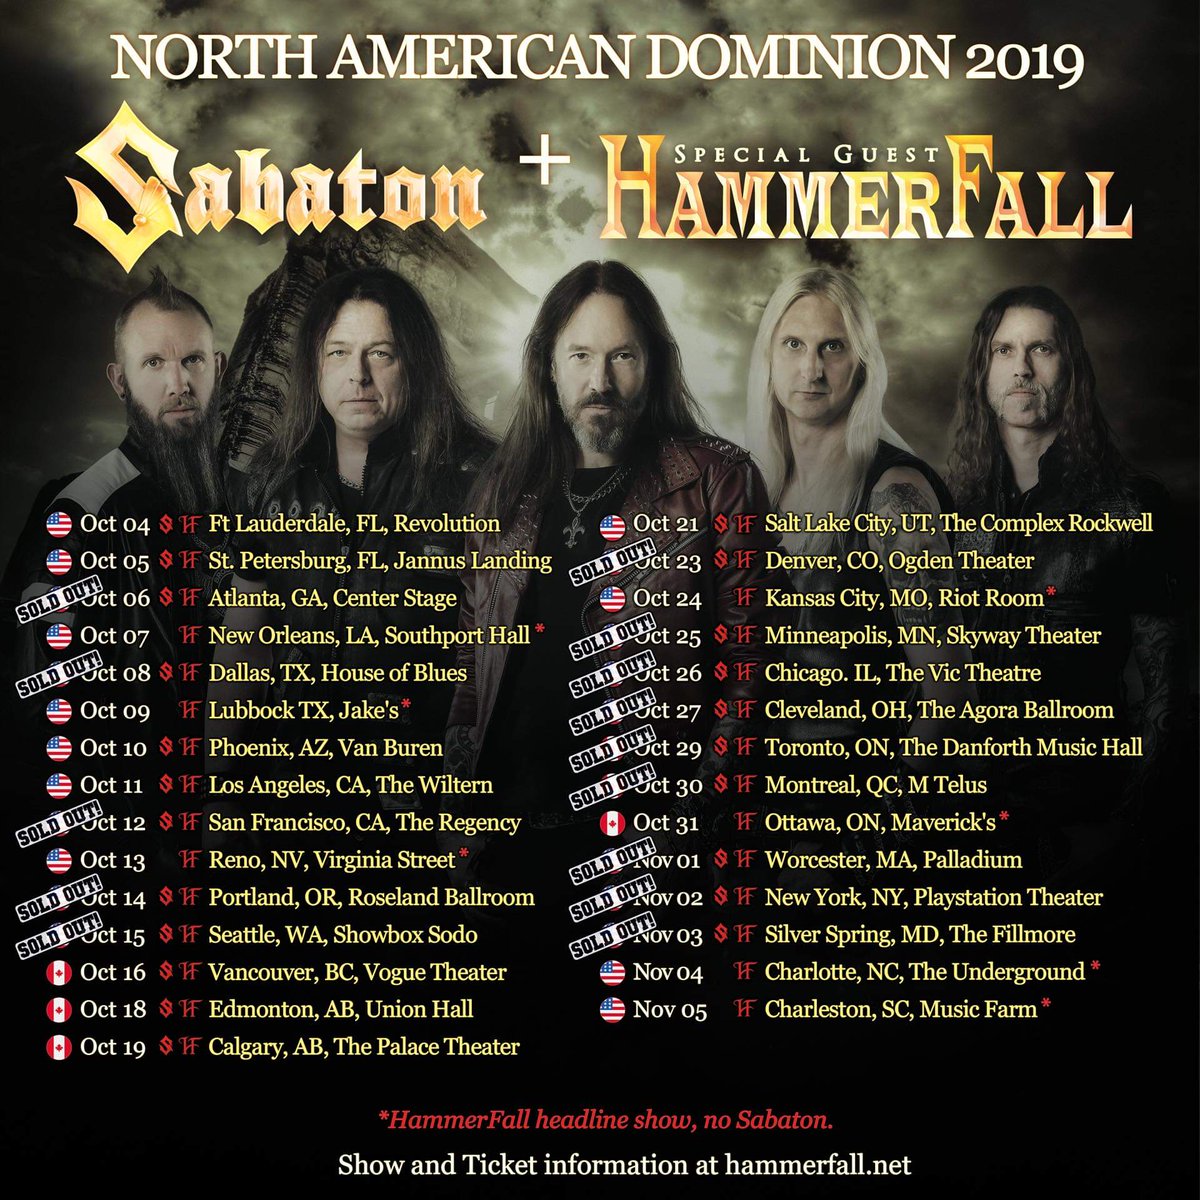 I just got assigned to 📷 shoot the @HammerFall show @FillmoreNC on Nov 4th, 2019 😃
.
.
#HeavyMetal #music #concertphotography #HammerFall #ConcertTour #photography #livemusic #TemplarsOfSteel #concert #GIG #touring #show #live #dominion #oneagainsttheworld #festival